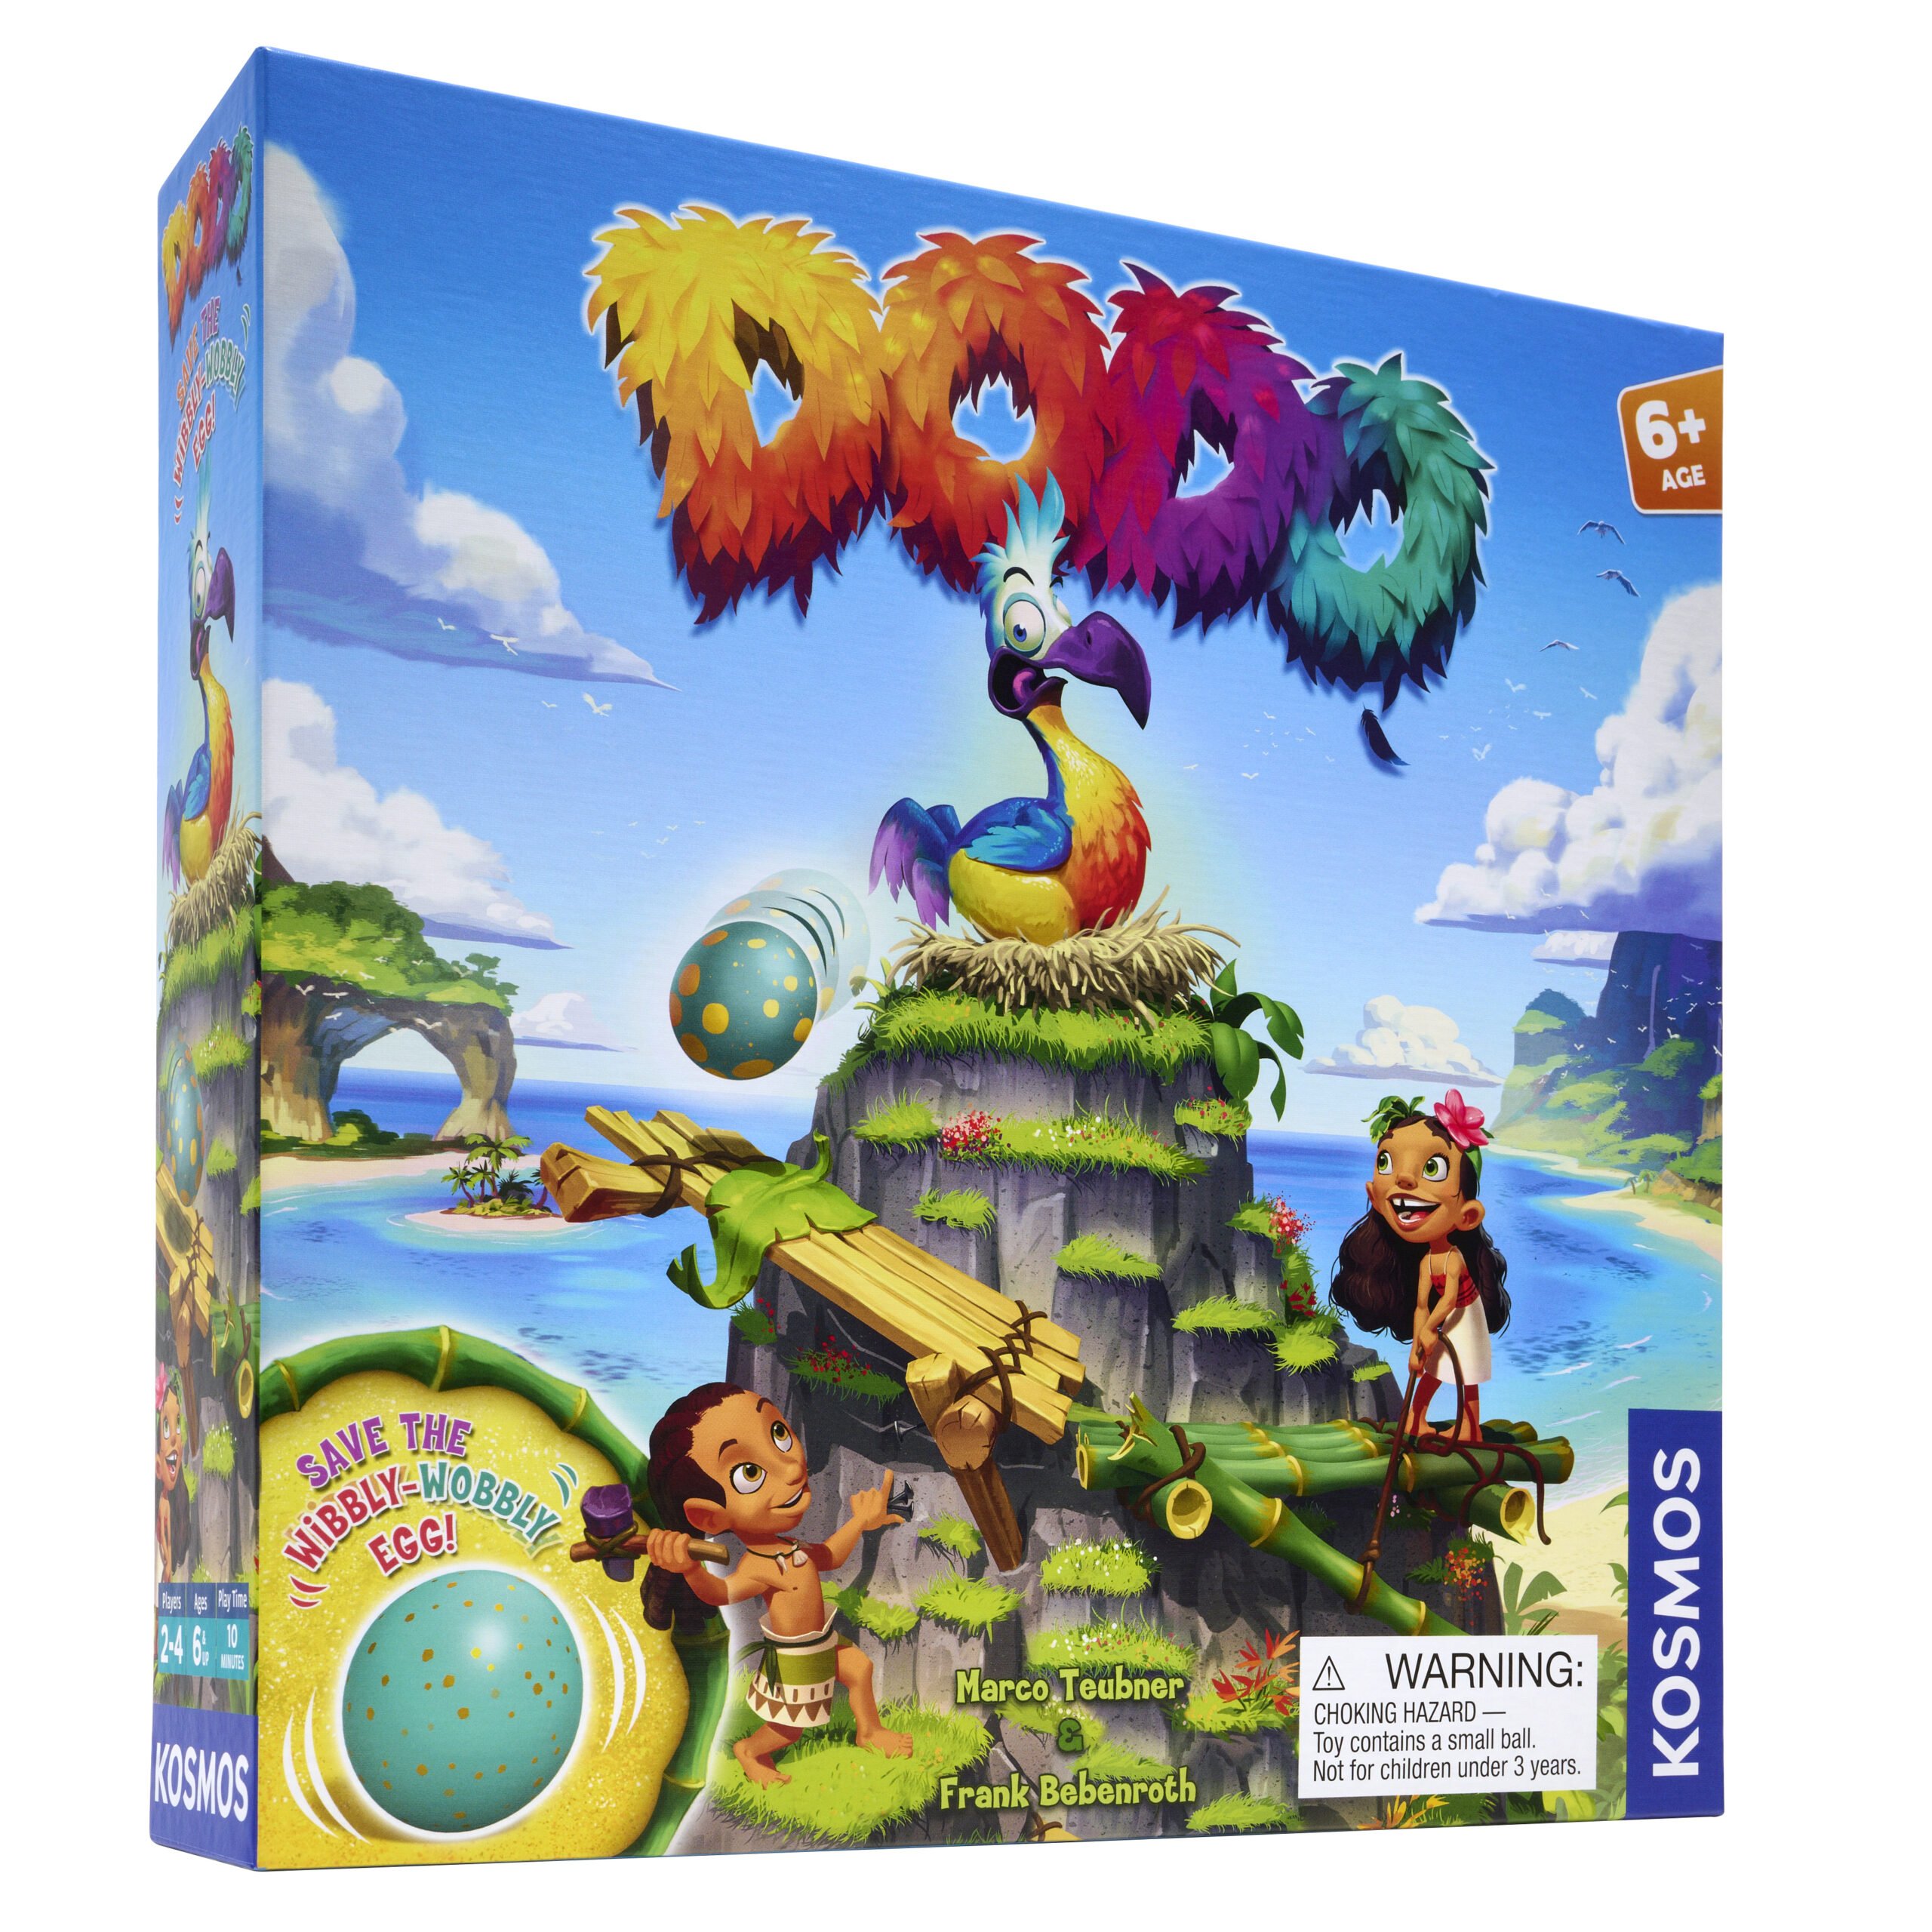 Get hooked on Dodo - the fun and addictive board game from Kosmos!